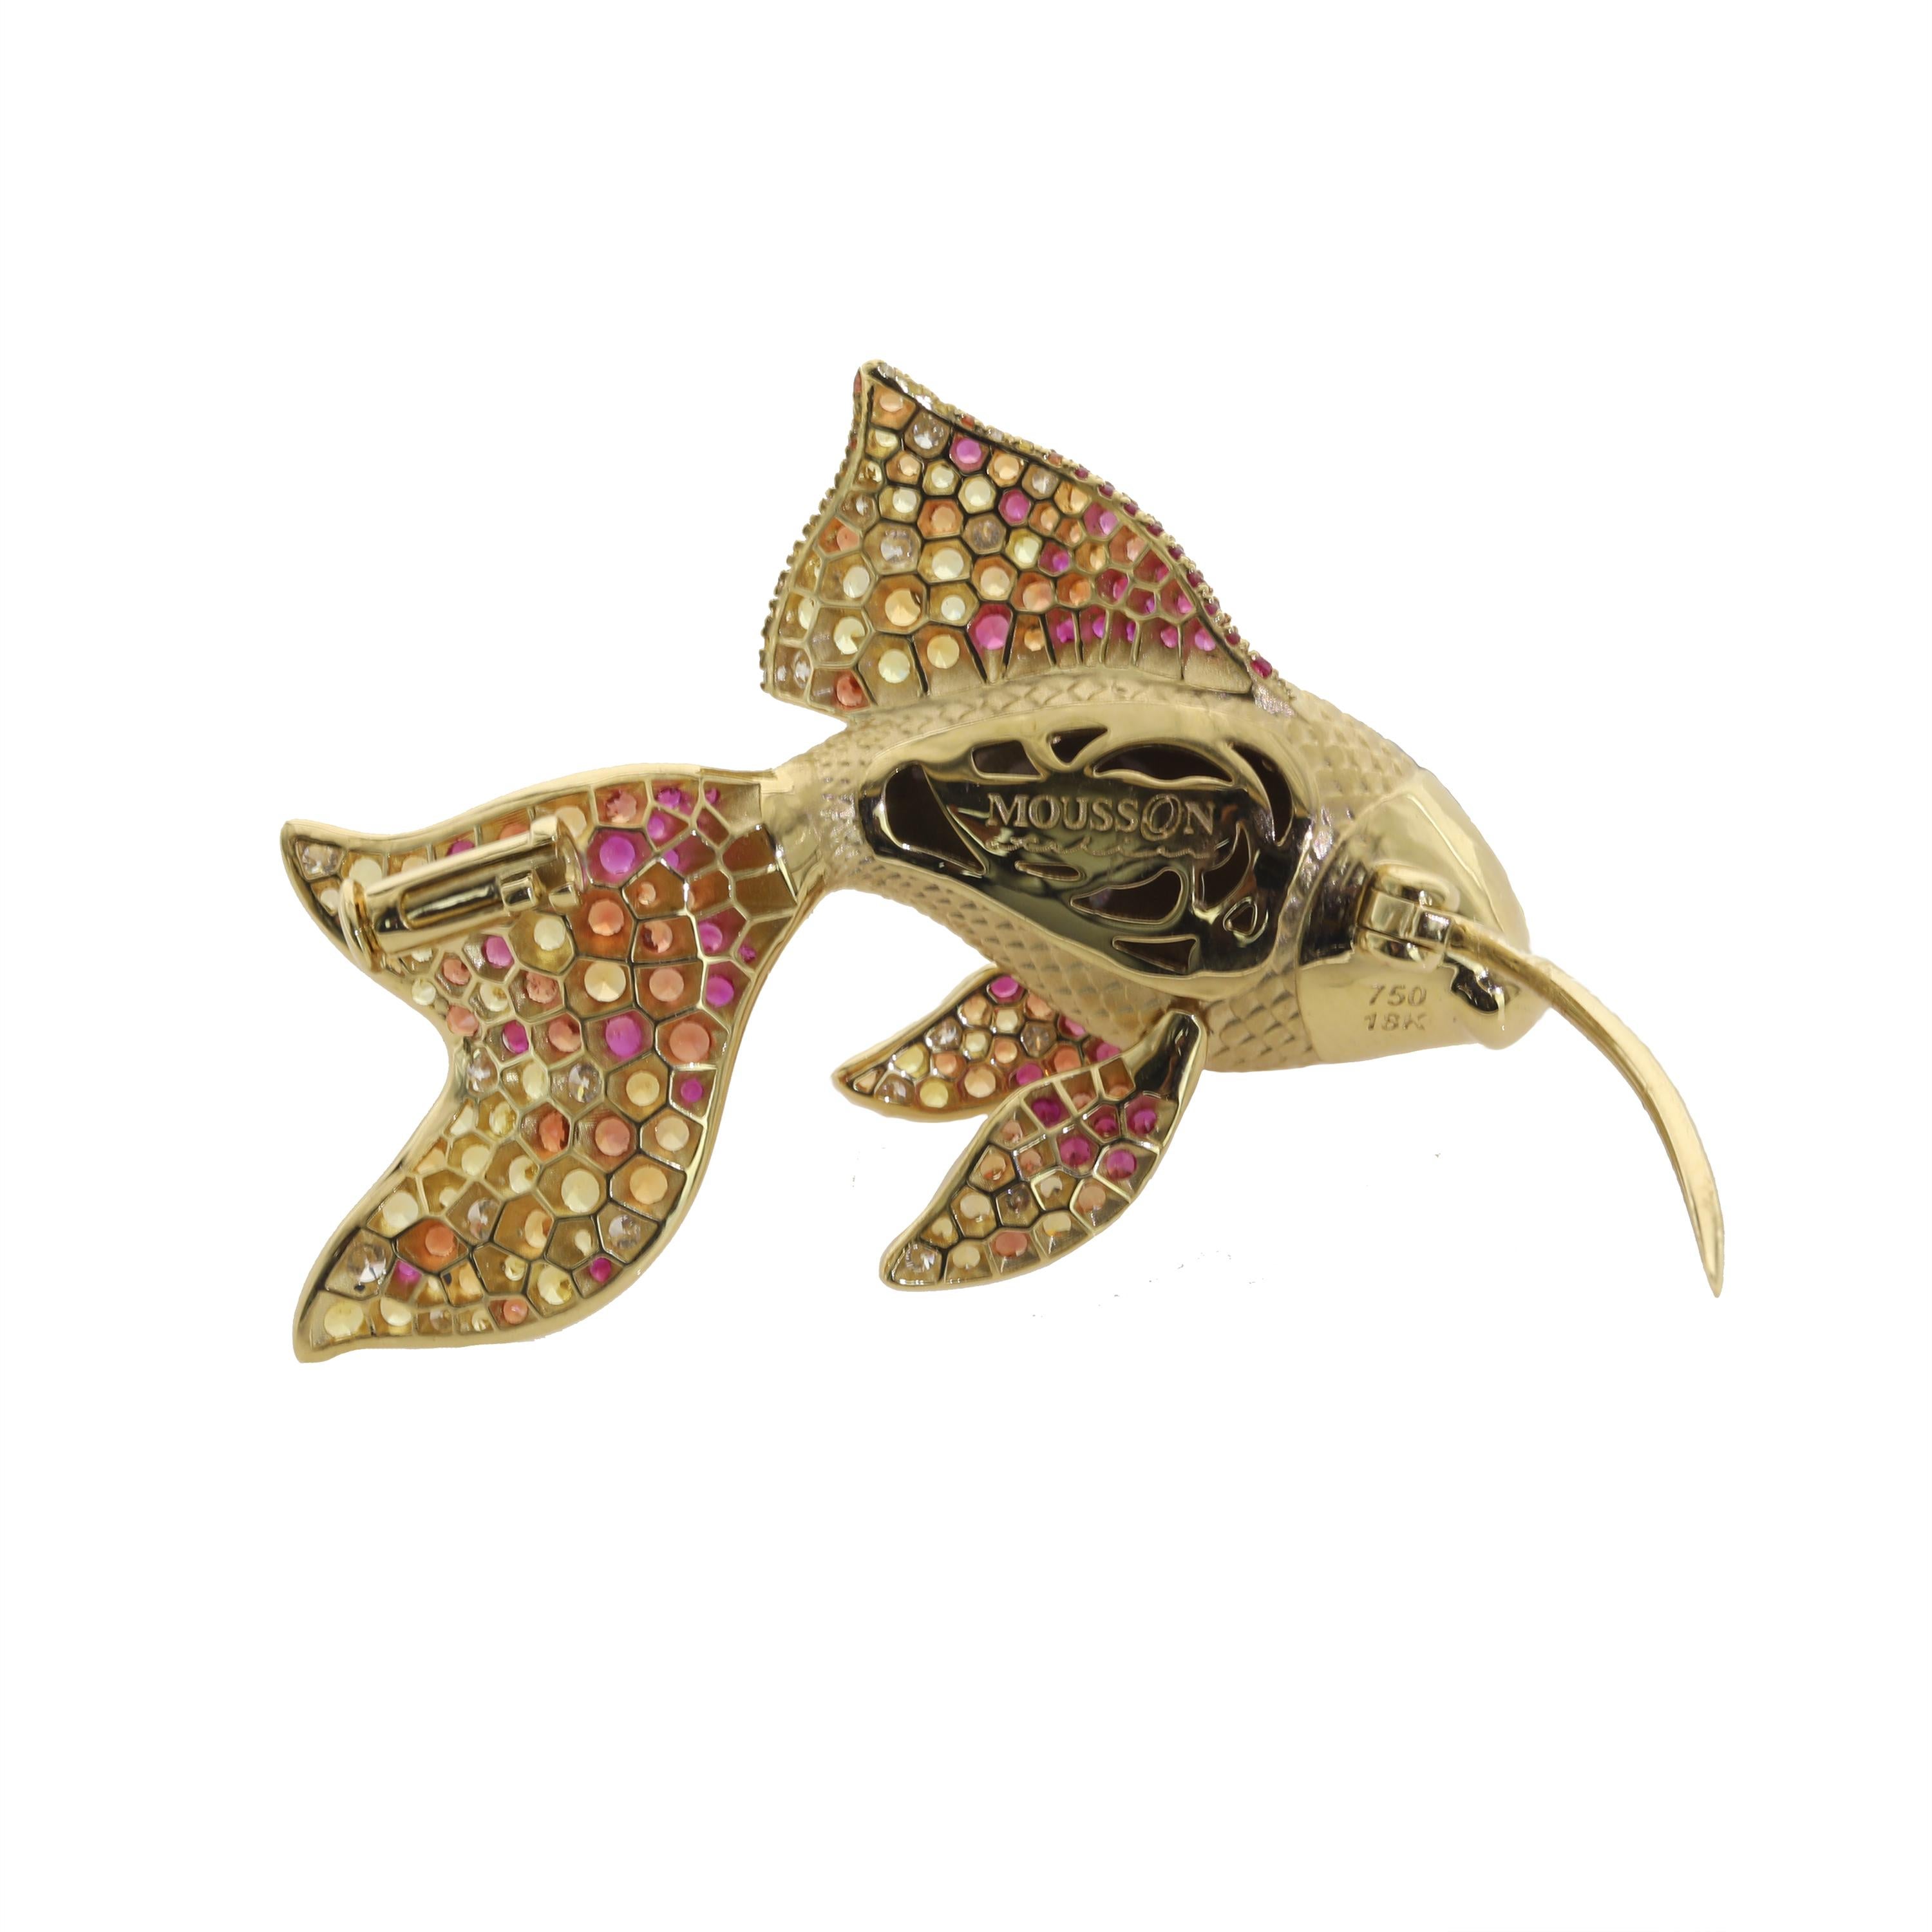 Diamond Multicolored Sapphire 18 Karat Yellow Gold Golden Fish Brooch
The fins are moving.

37.3x26x9 mm
9.58 gm